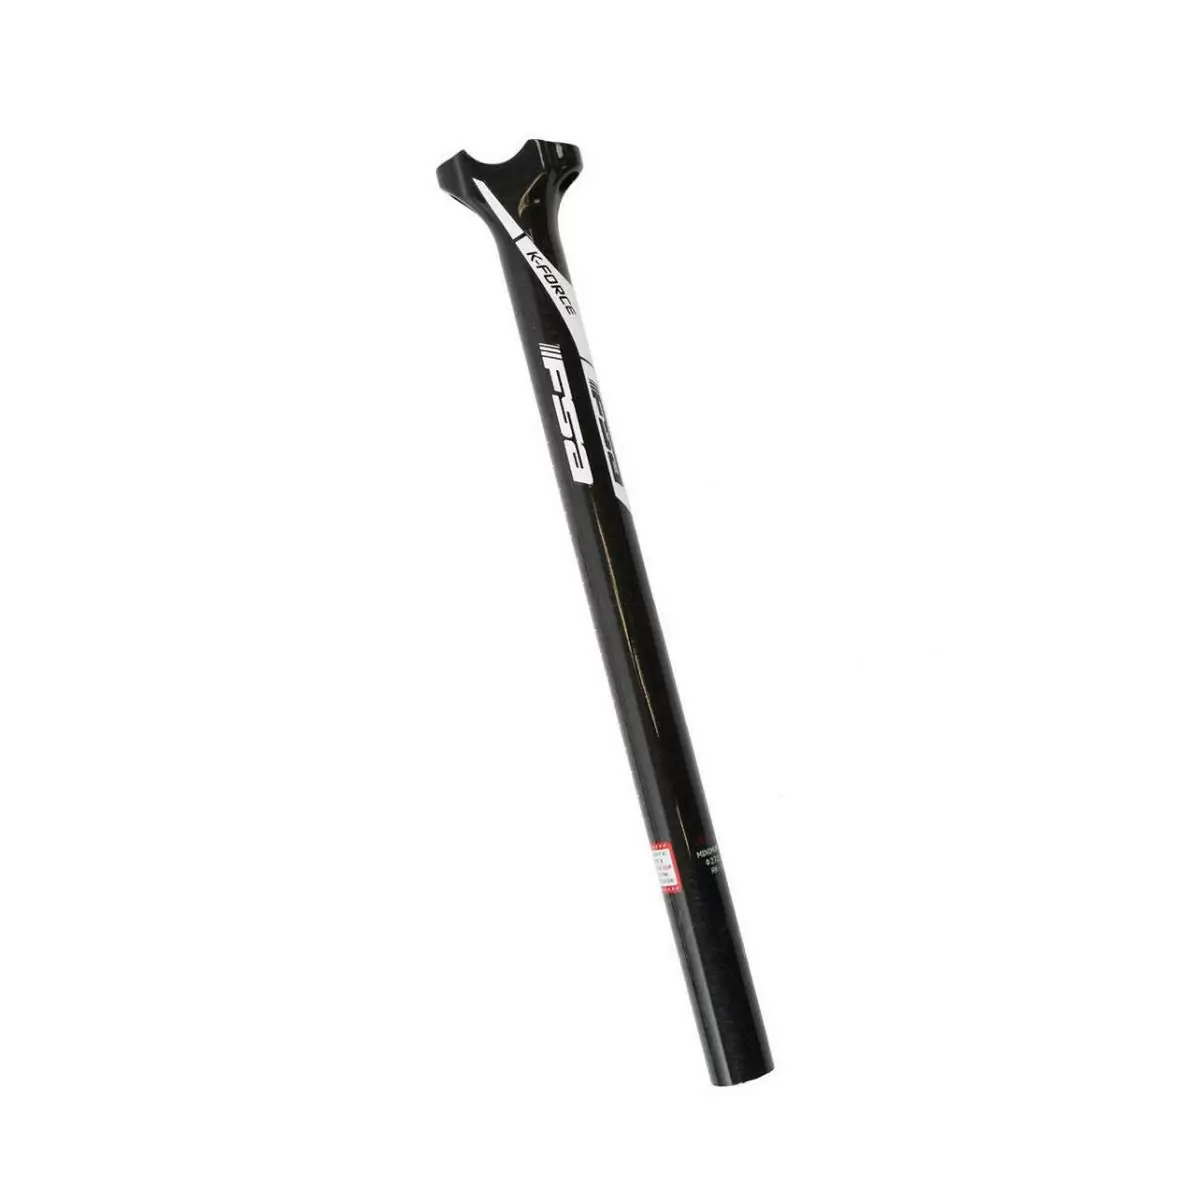 seatpost k-force 31,6x350mm sb0 di2ps carbon ridewill team edition - image